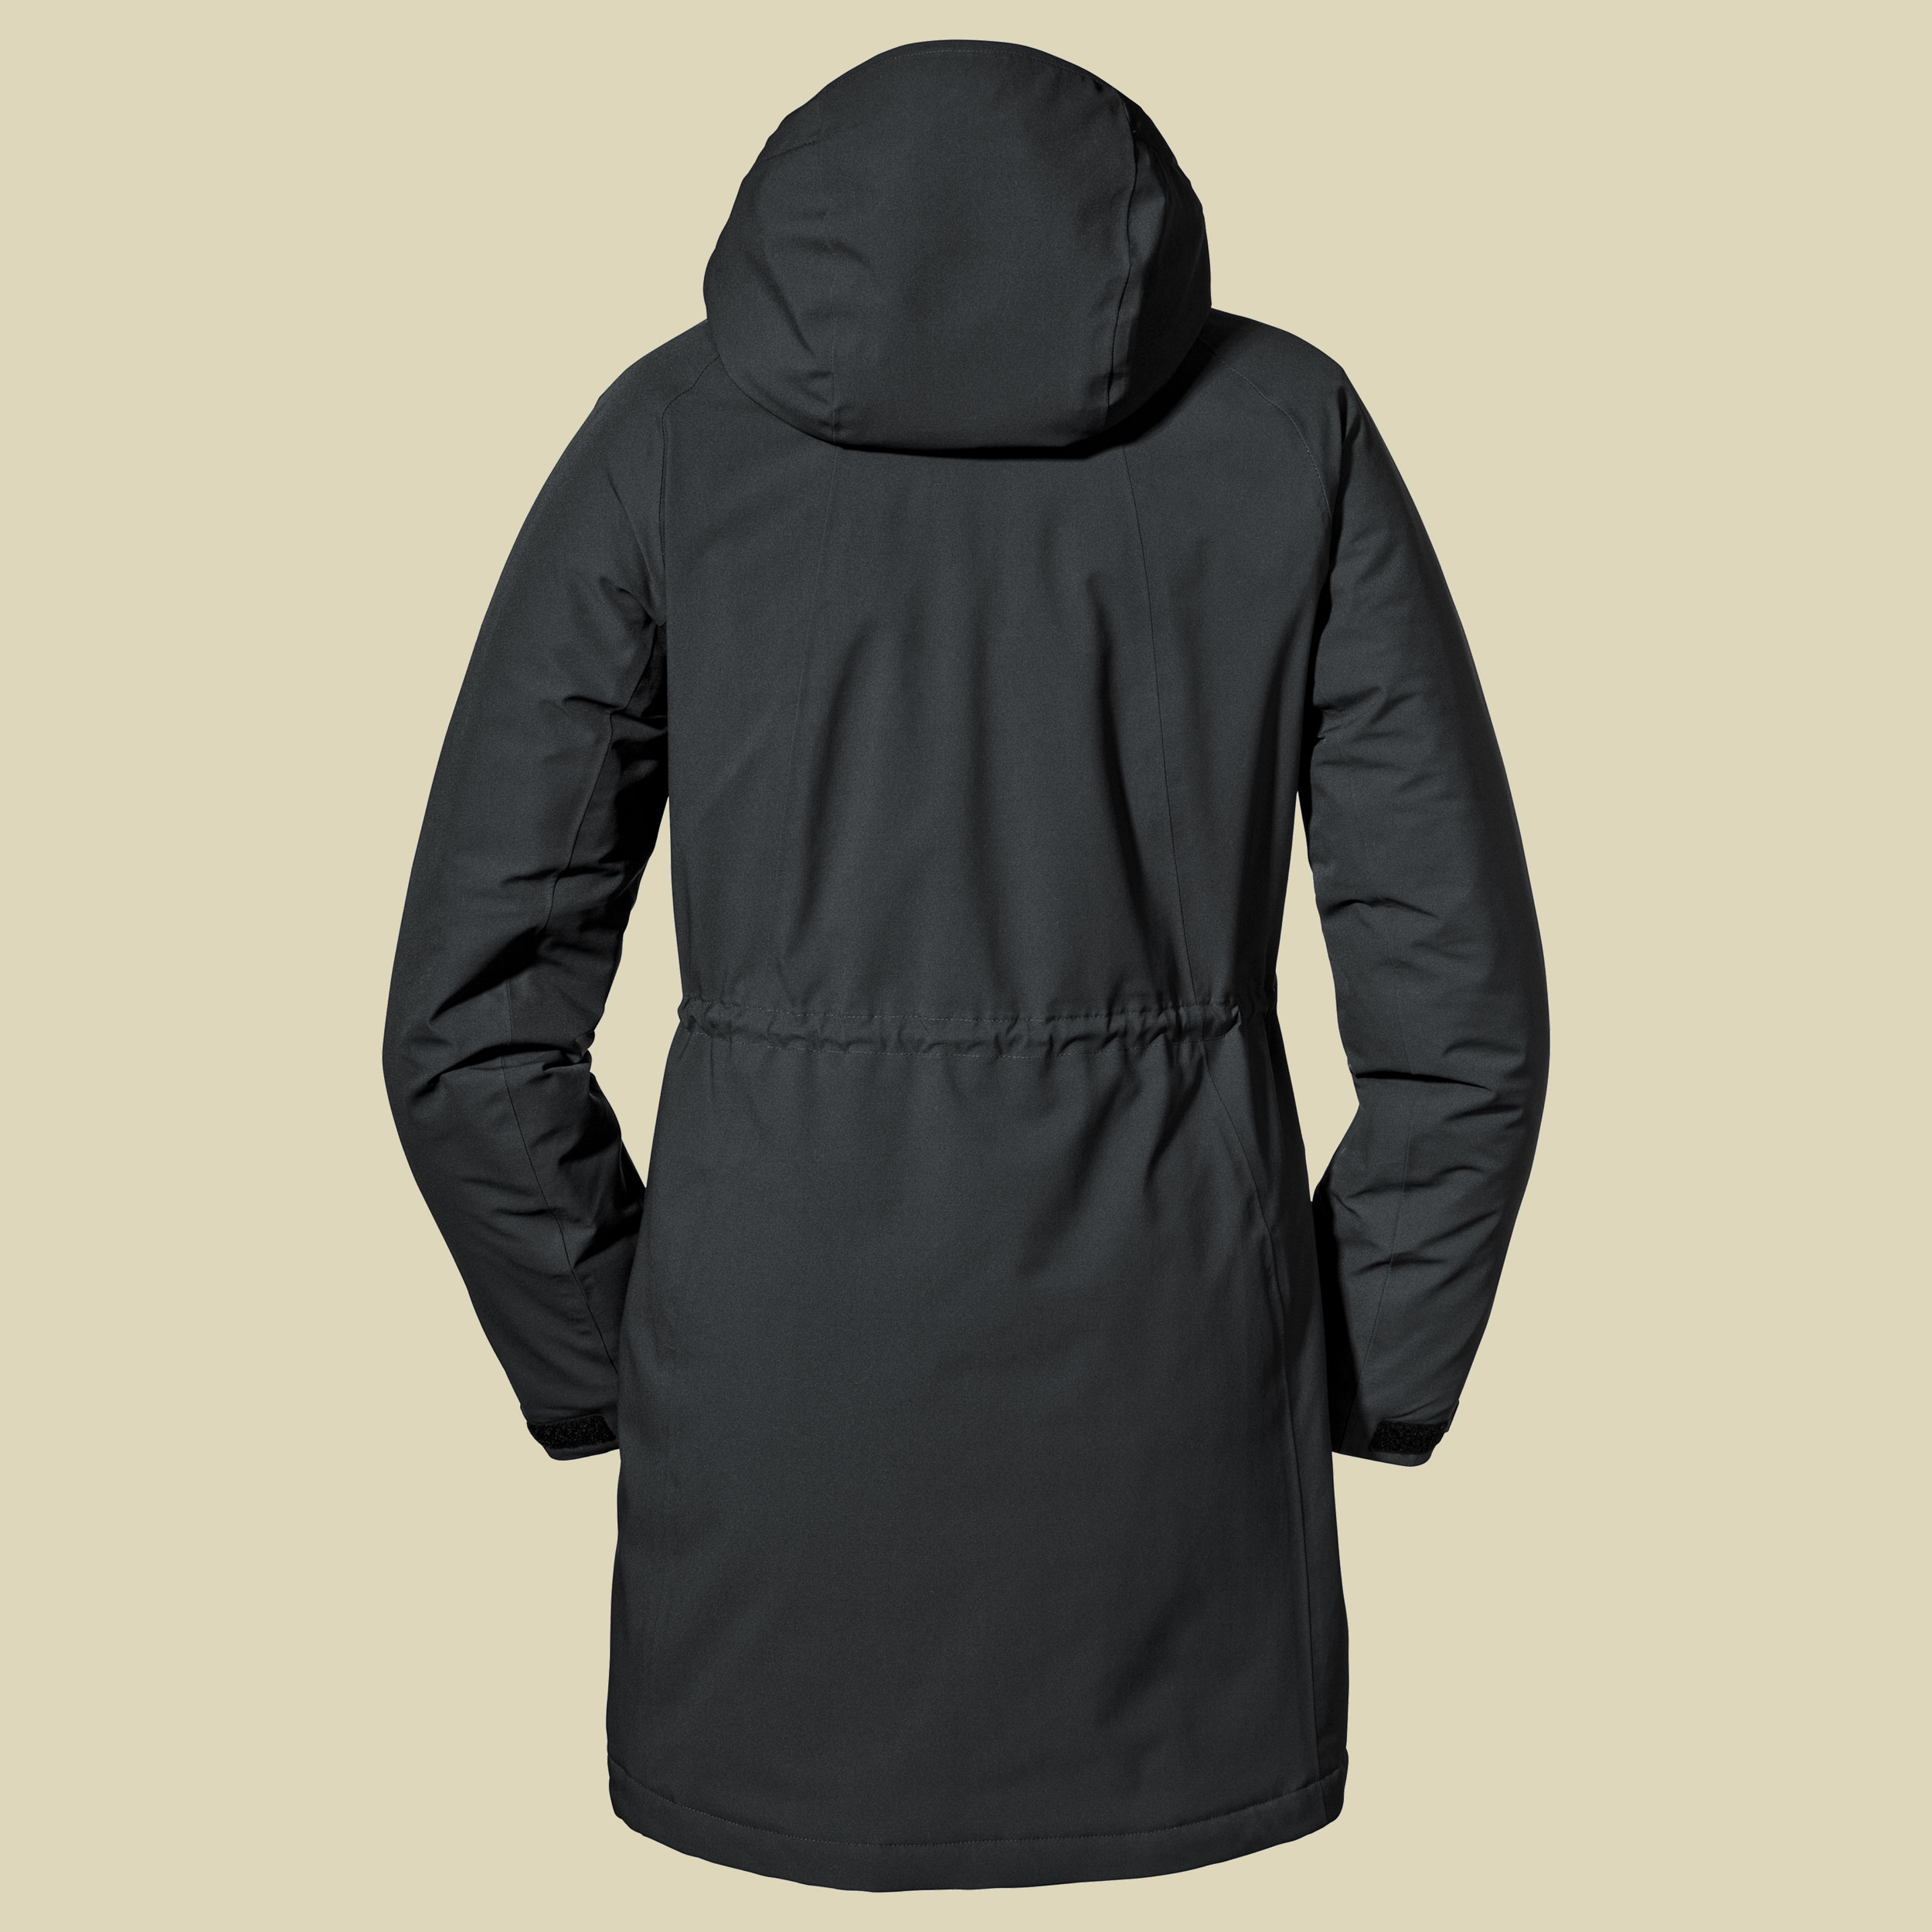 Insulated Jacket Bastianisee L Women Größe 42 Farbe black